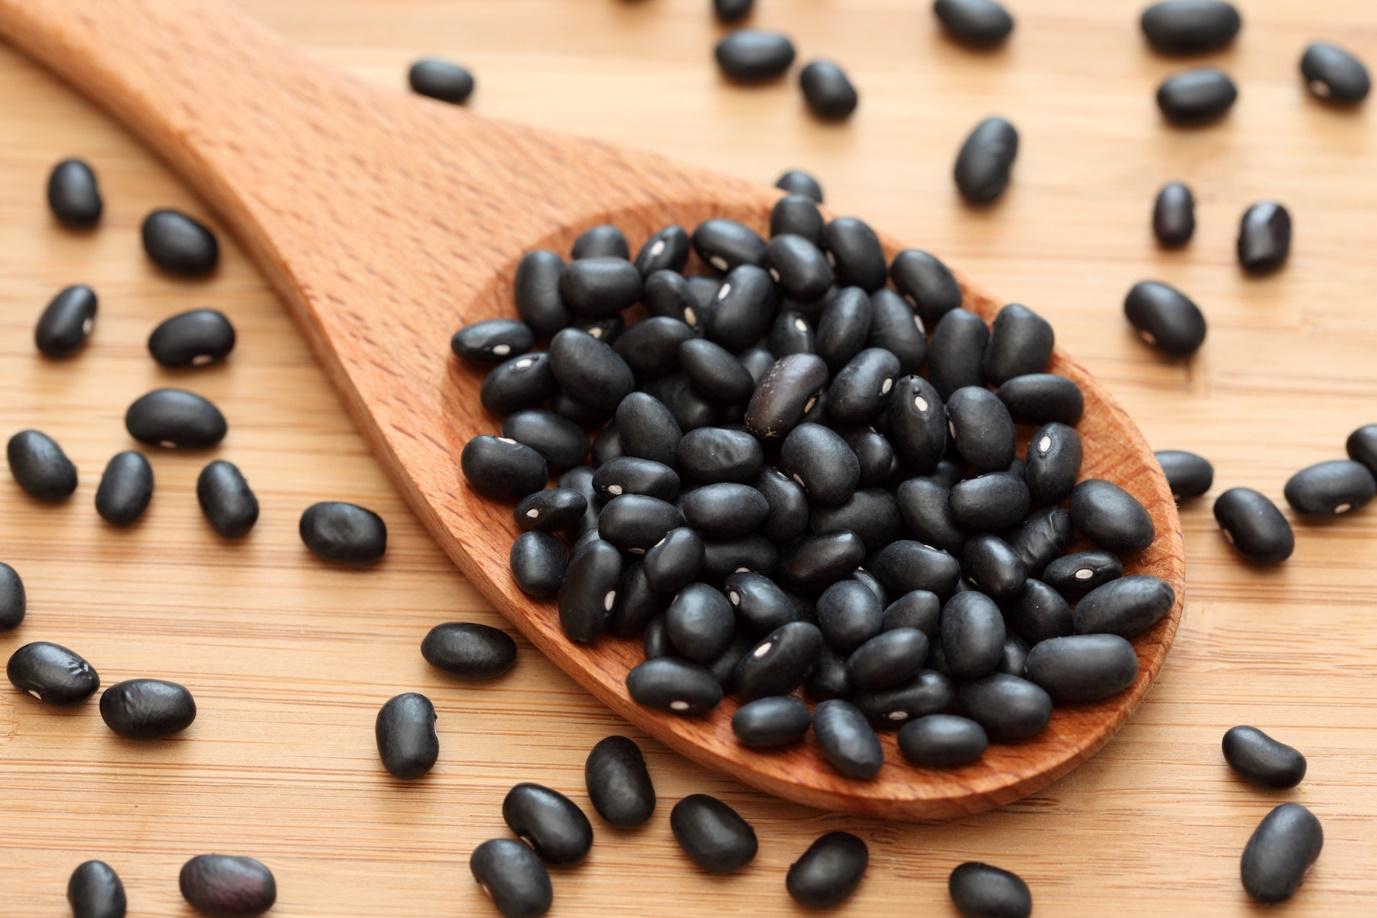 A wooden spoon with black beans on itDescription automatically generated